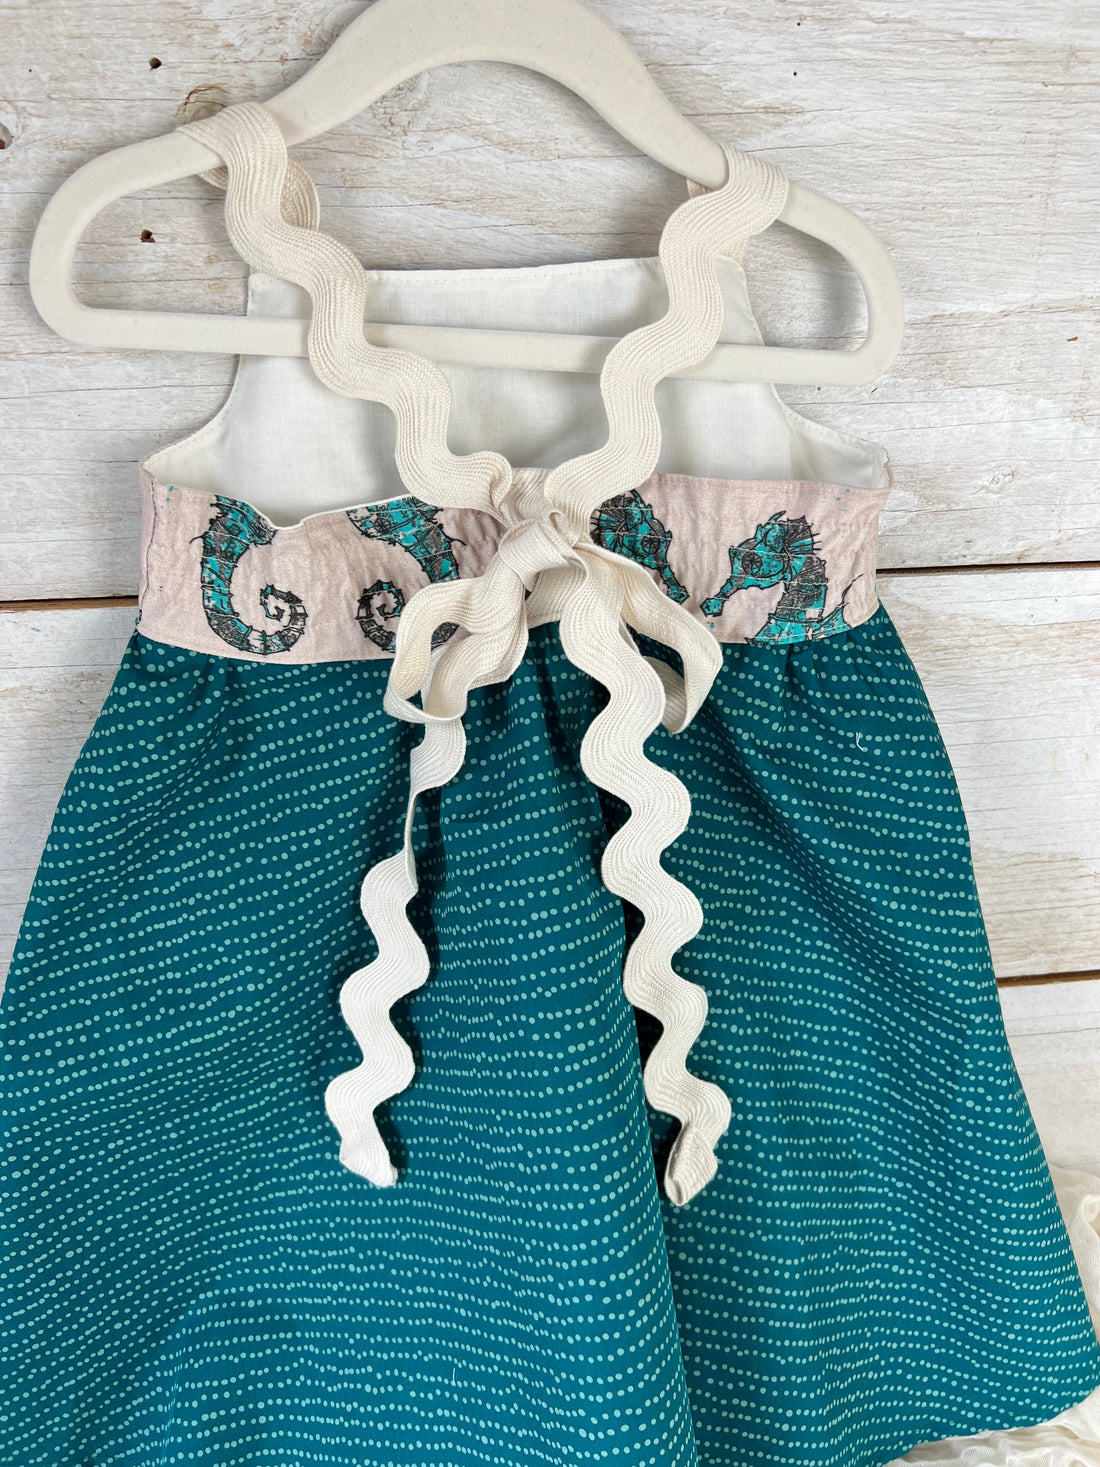 Limited Edition  Dress - Seahorse Twirl Dress -  Made in Hawaii USA - Sizes 3/4 yr and 5/6 yr.